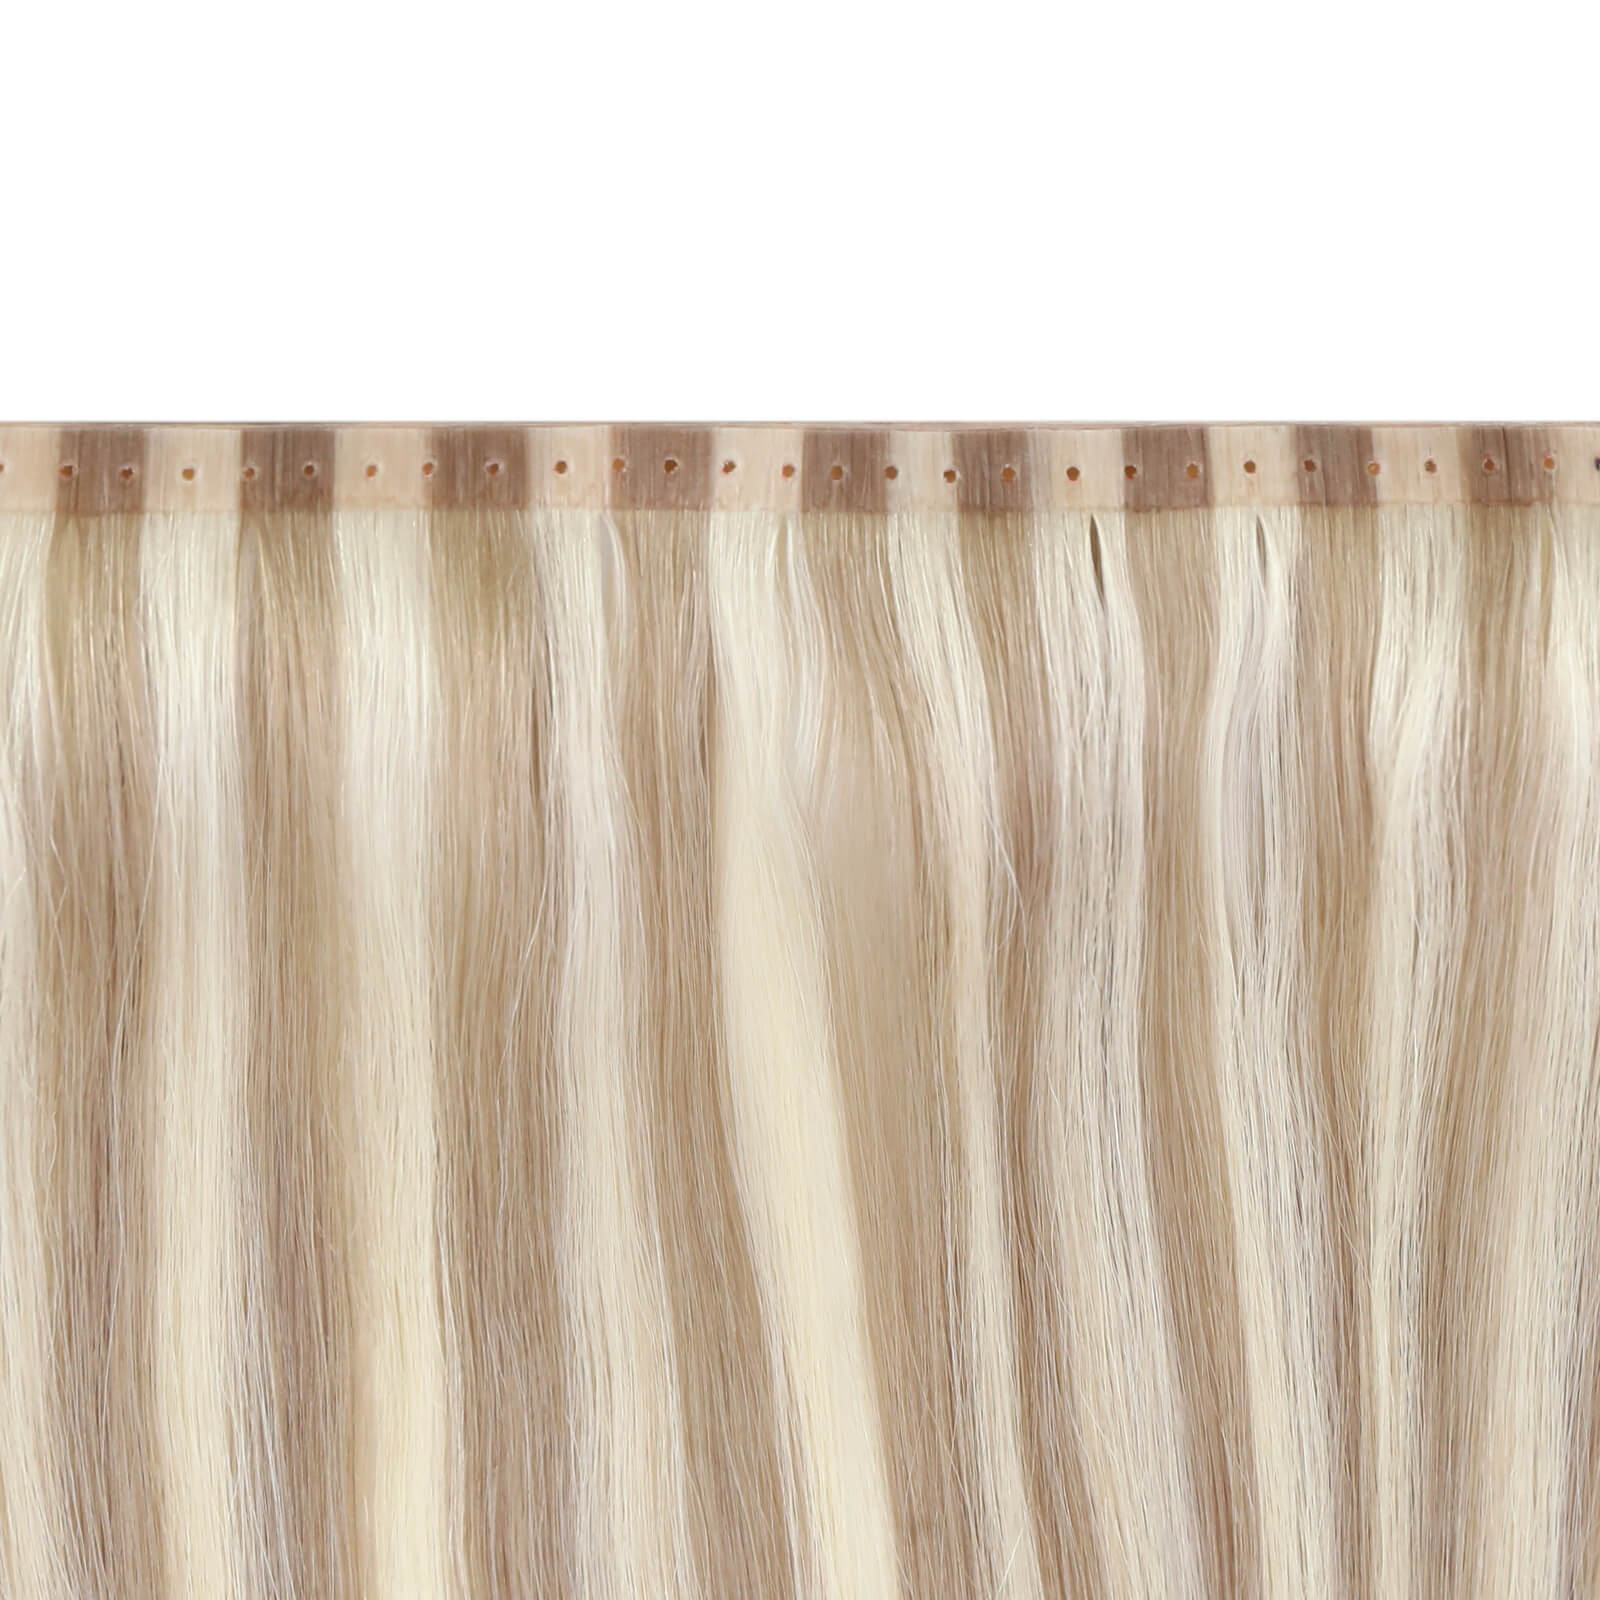 Pu Injection Skin Weft With Holes Highlighted P18/613